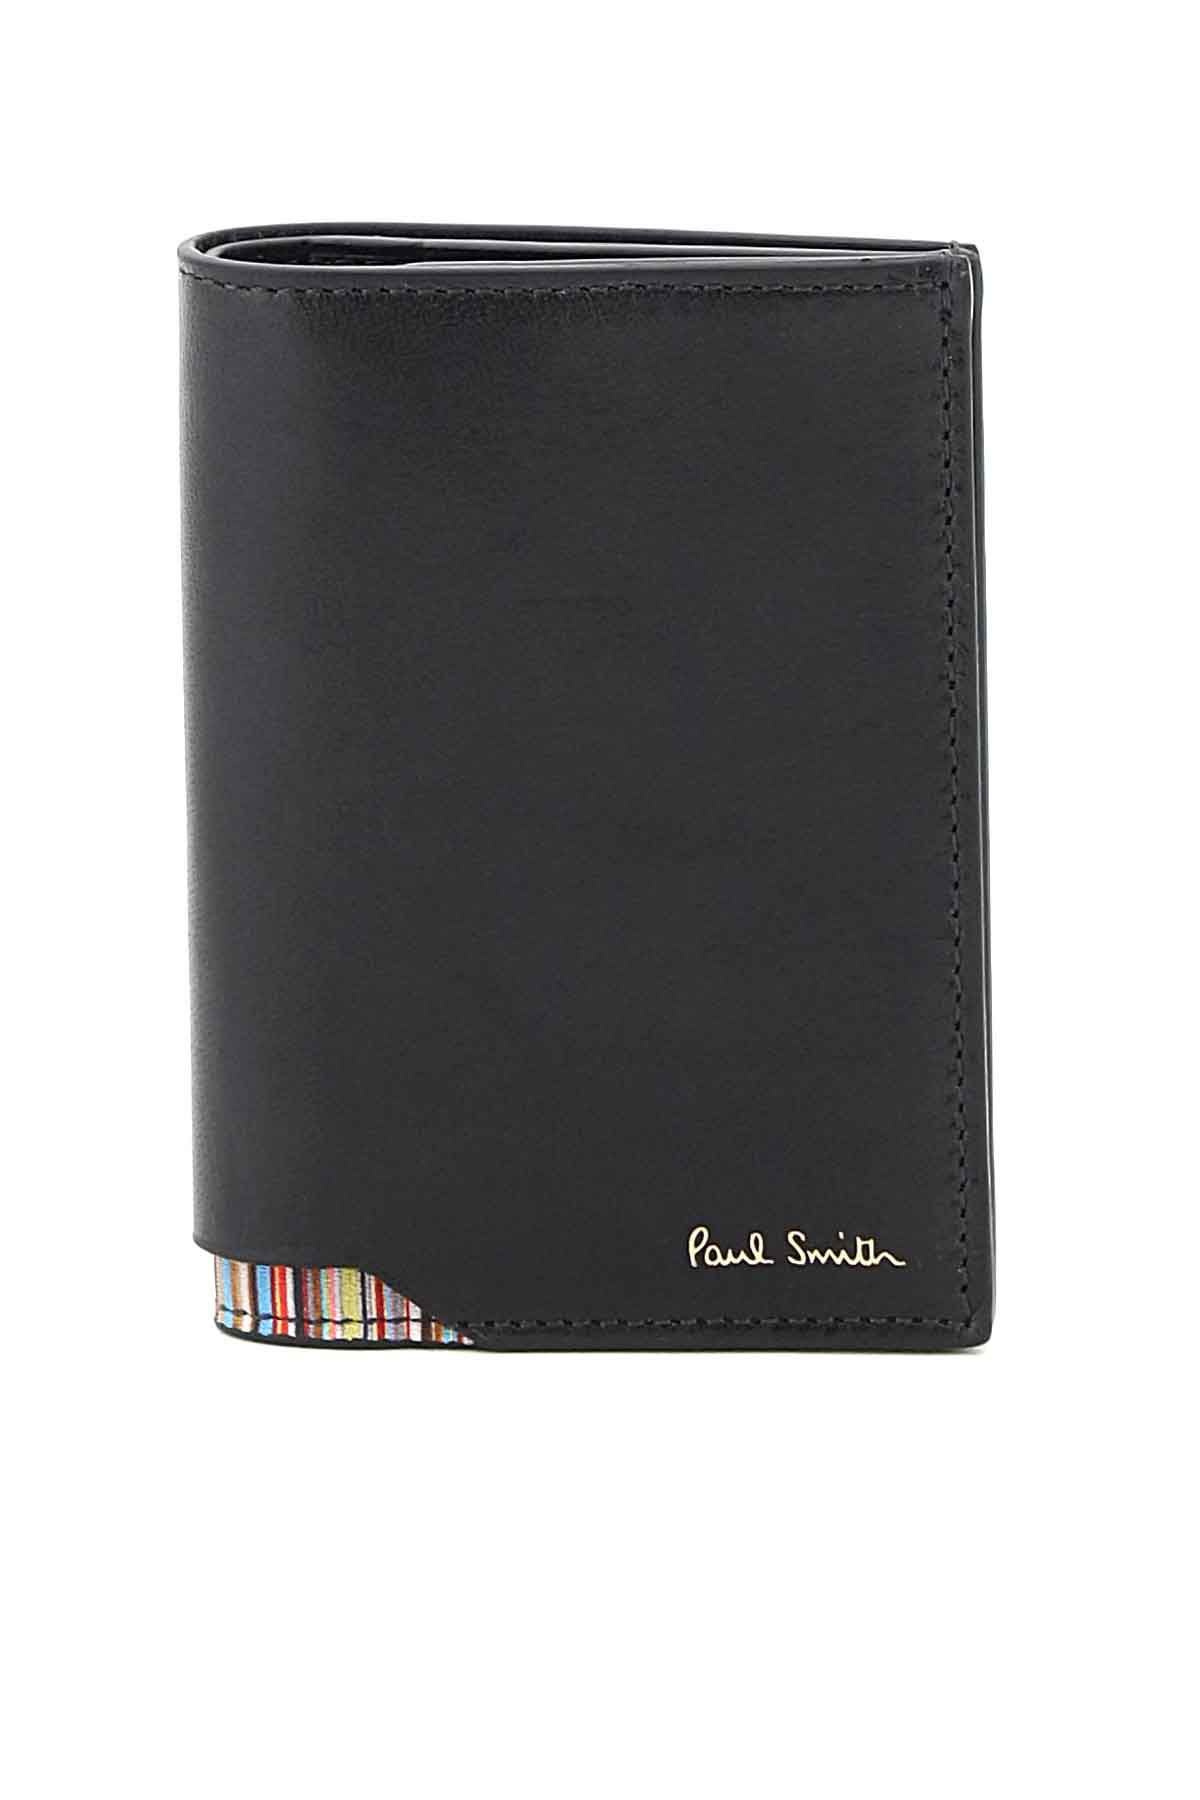 Paul Smith Card Holder With Signature Stripe Insert